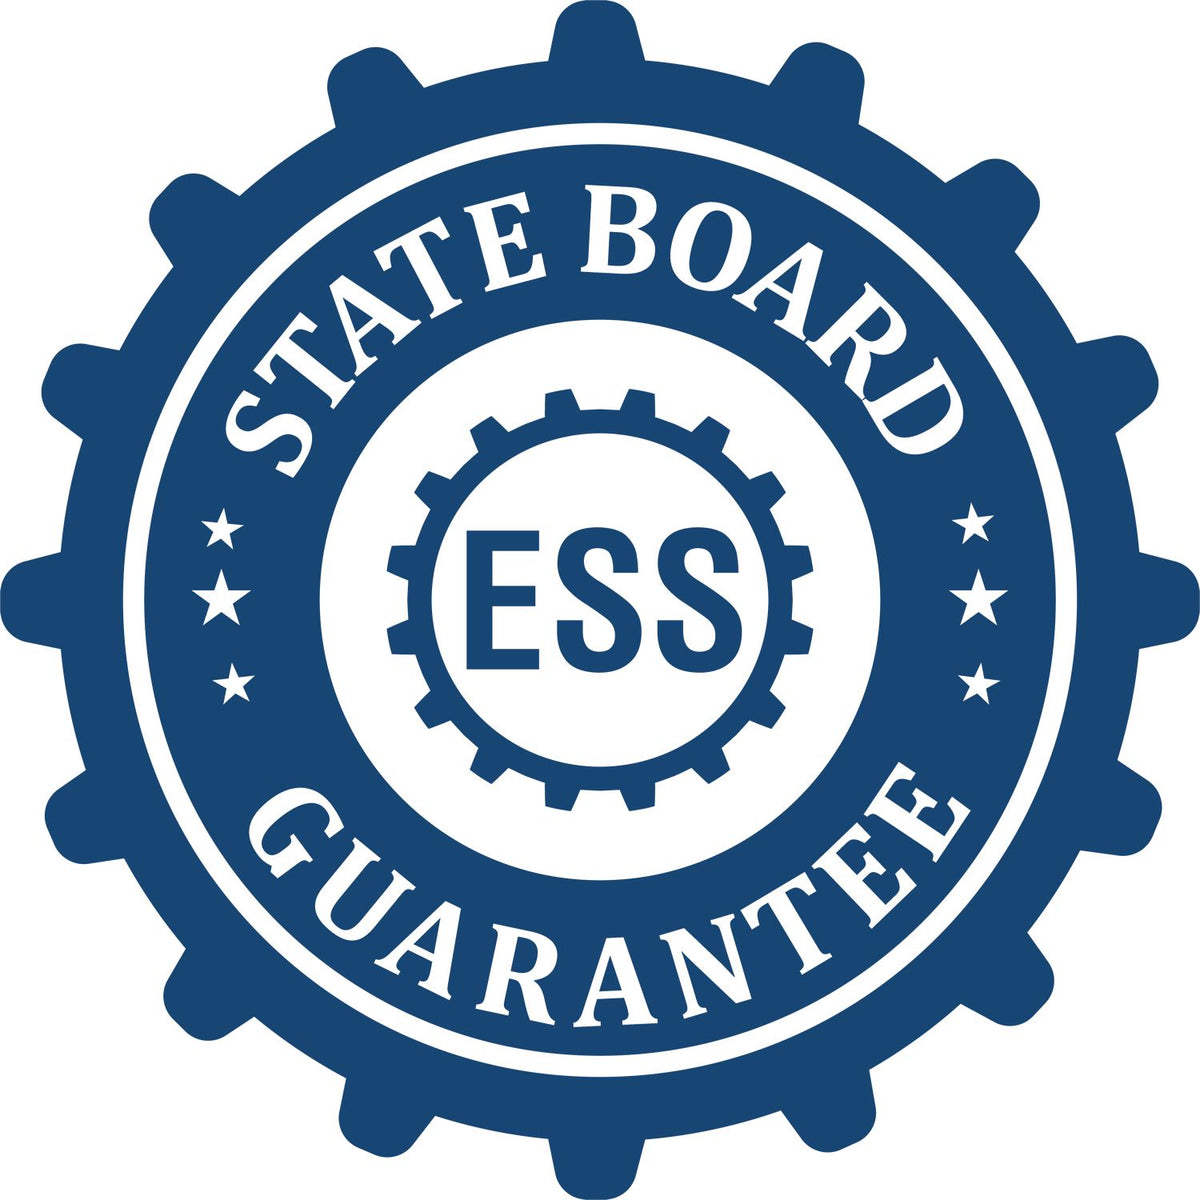 An emblem in a gear shape illustrating a state board guarantee for the Heavy Duty Cast Iron Connecticut Architect Embosser product.